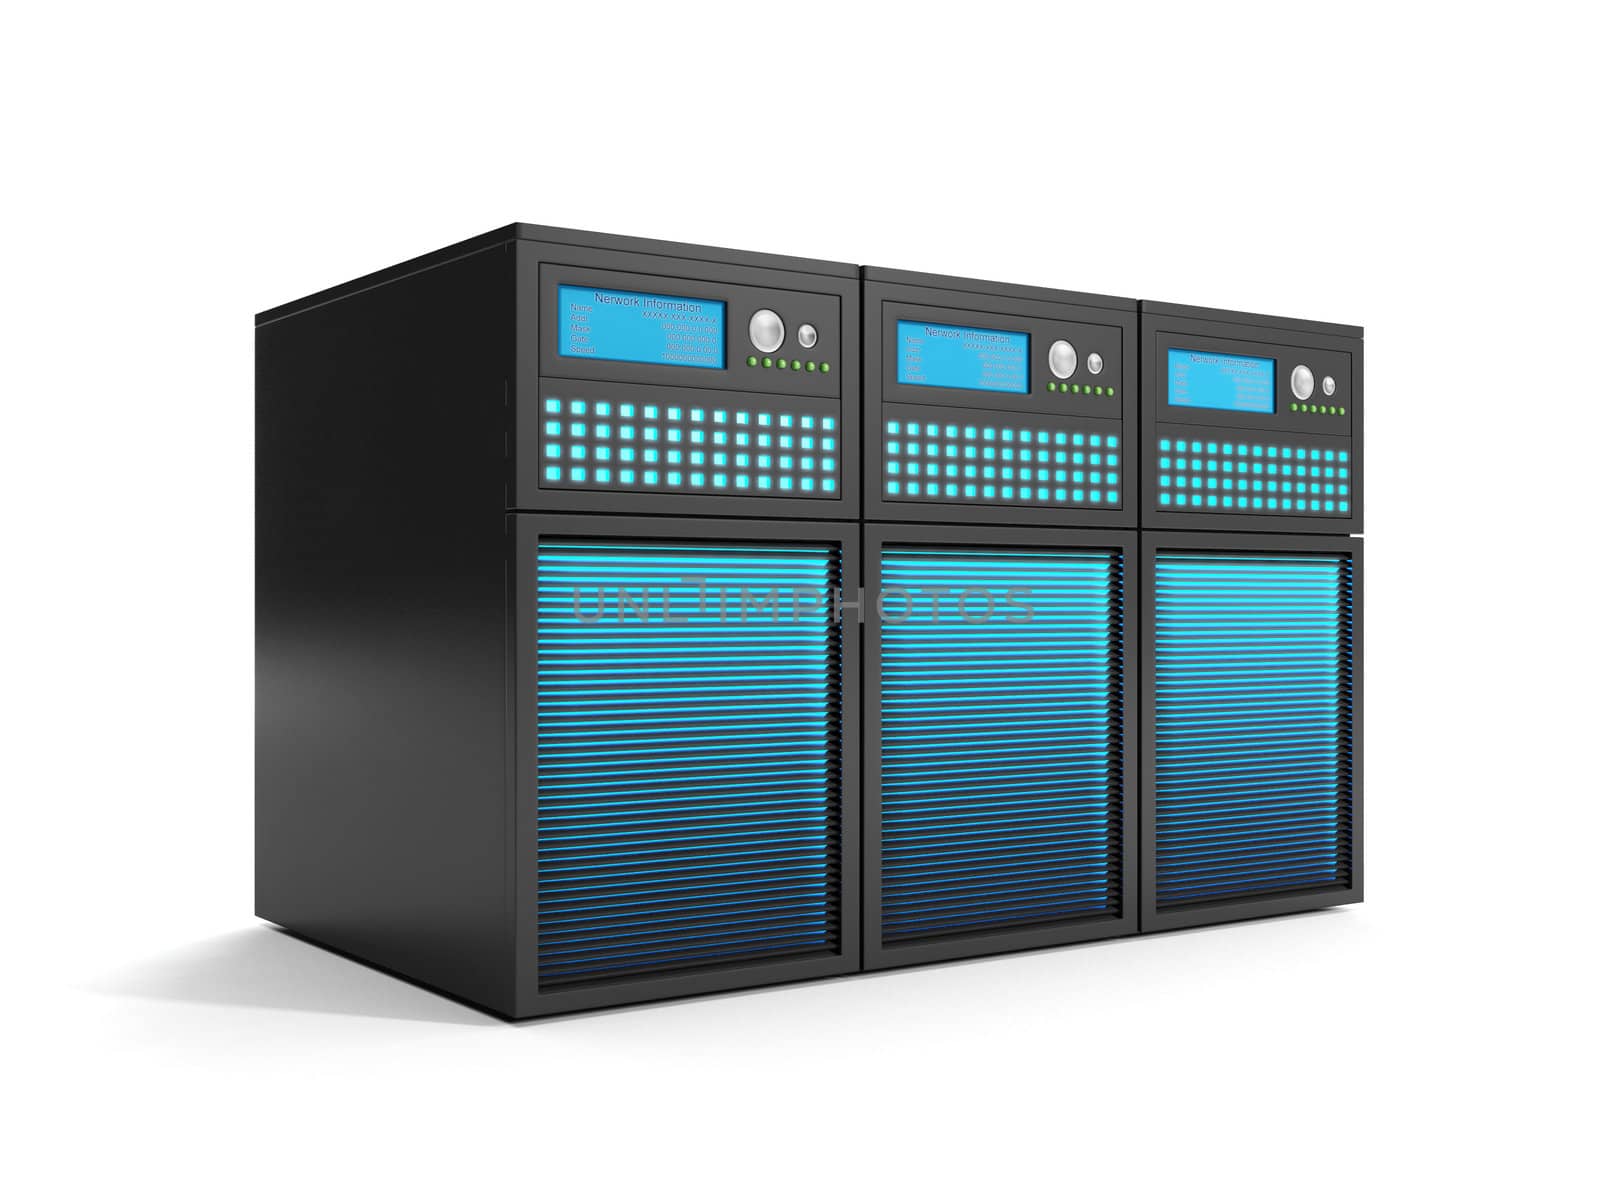 3d illustration: Data Storage, a group of servers in close-up by kolobsek